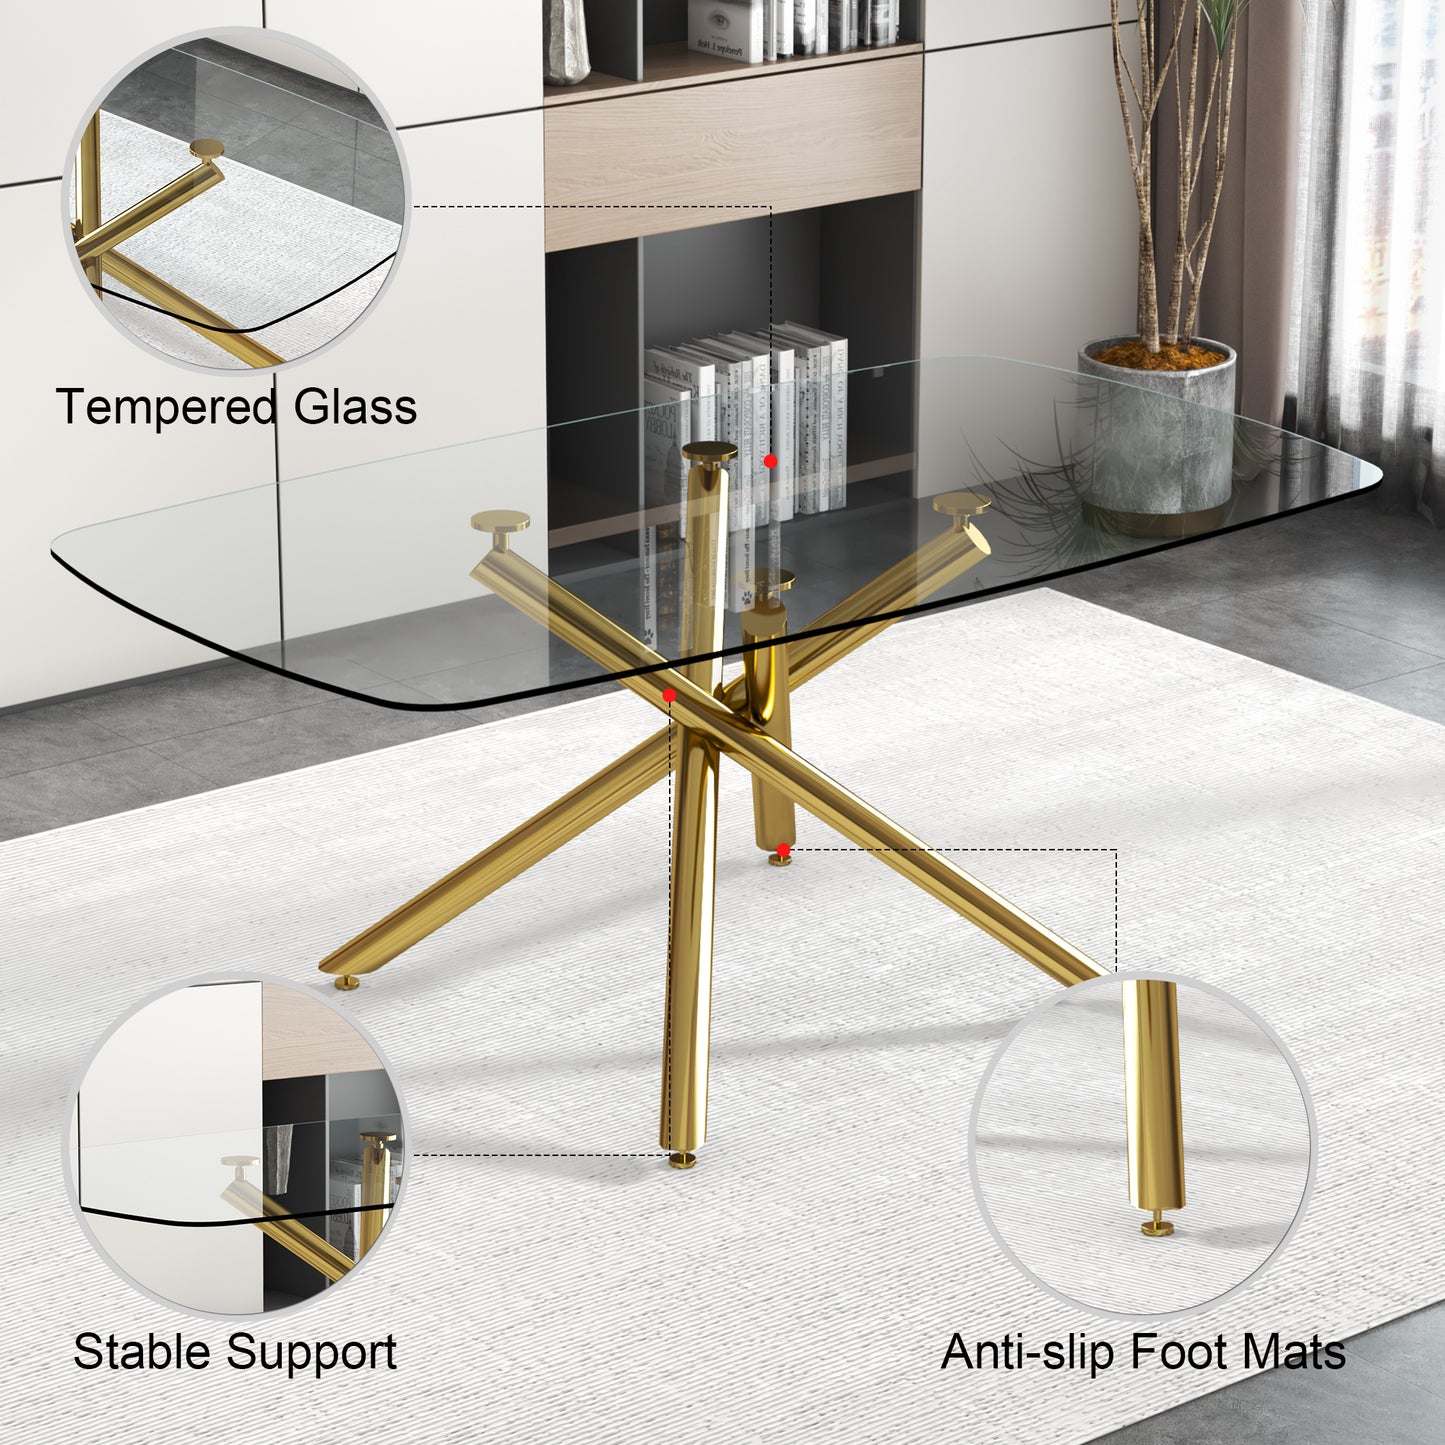 Large Modern Minimalist Rectangular Glass Dining Table for 6-8 with 0.39" Tempered Glass Tabletop and Golden Plated Metal Legs, for Kitchen Dining Living Meeting Room Banquet hall, 71'' x 39'' x30''